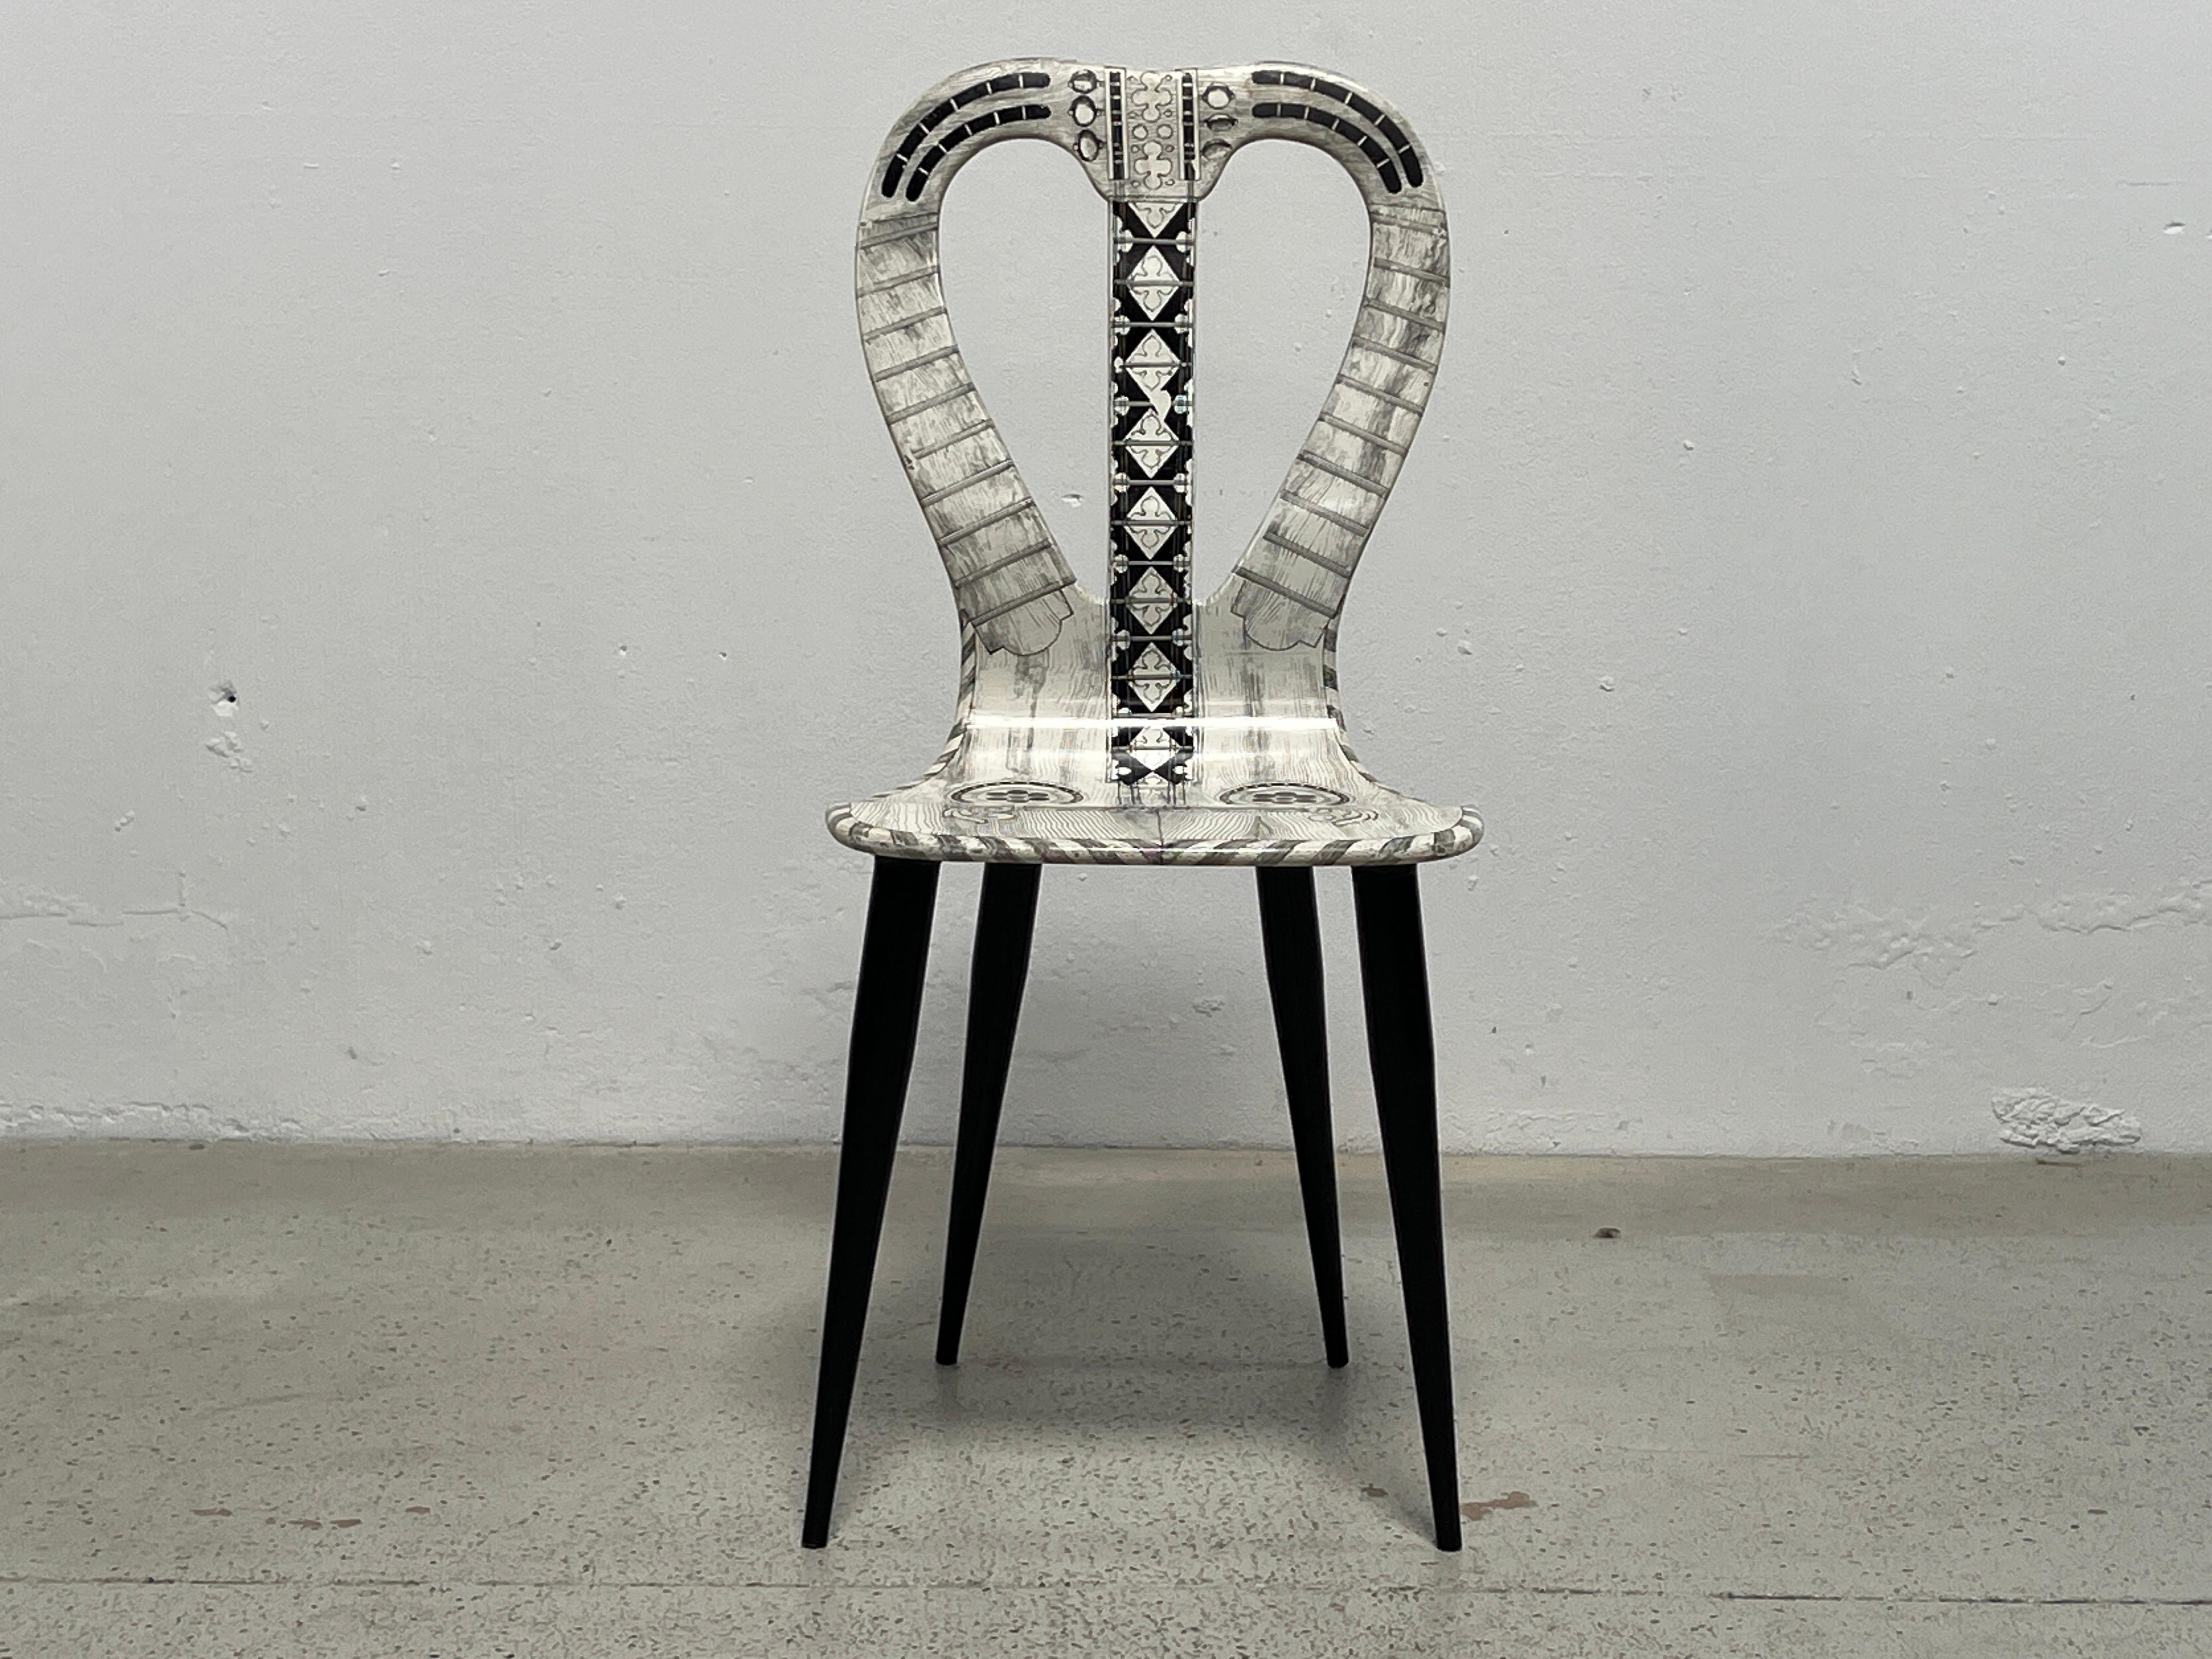 Piero Fornasetti 'Musicale' chair, an early and all original example. 